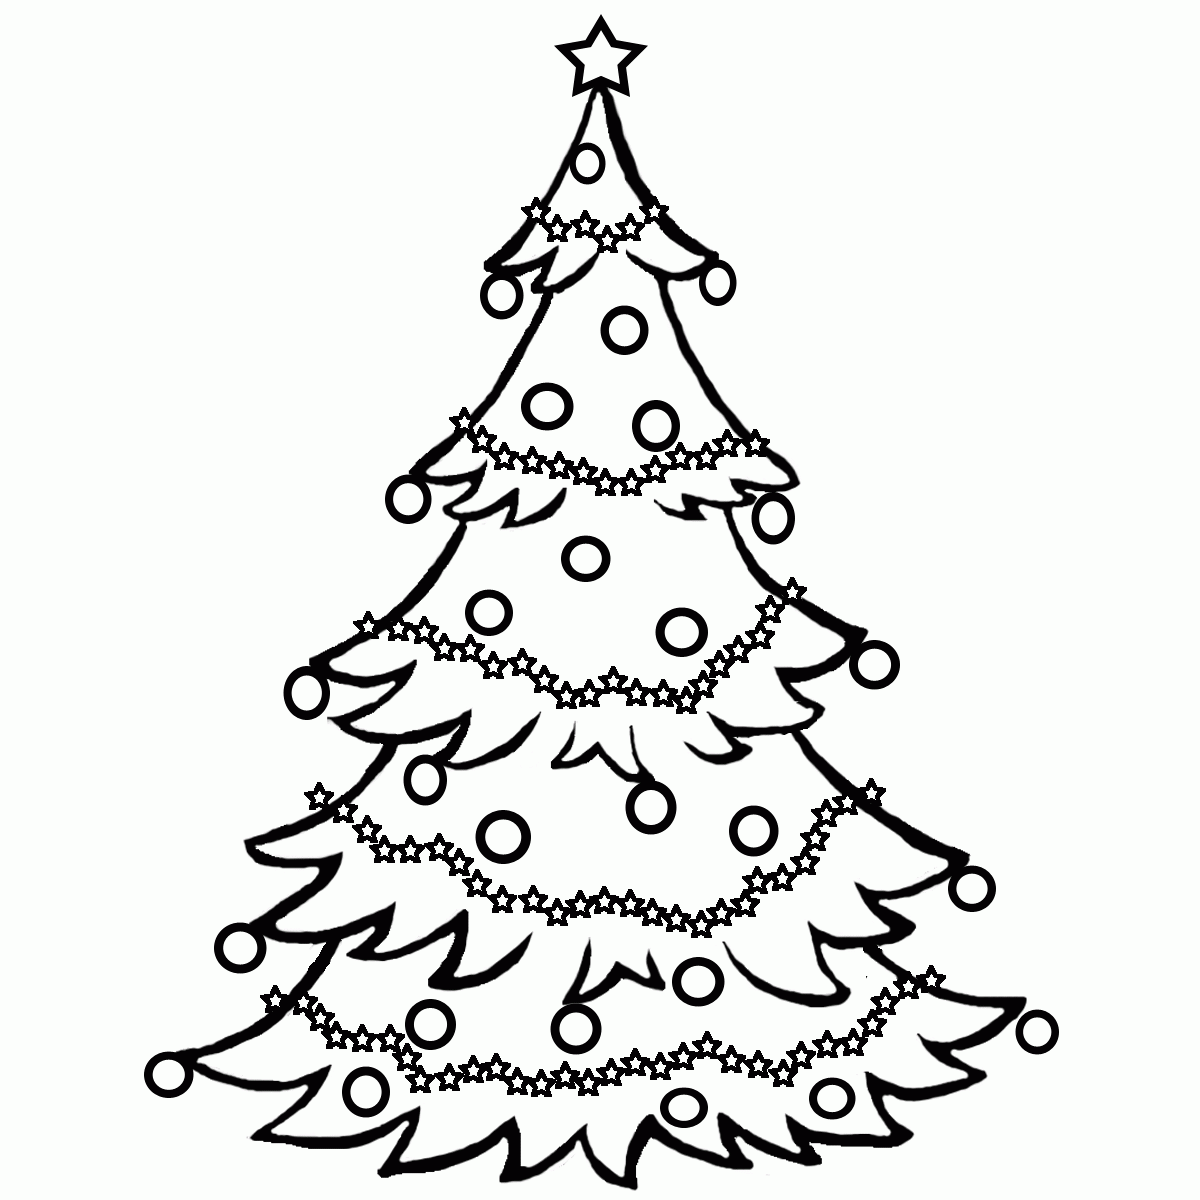 Free Coloring Pages Christmas Tree | Christmas Coloring pages of ...